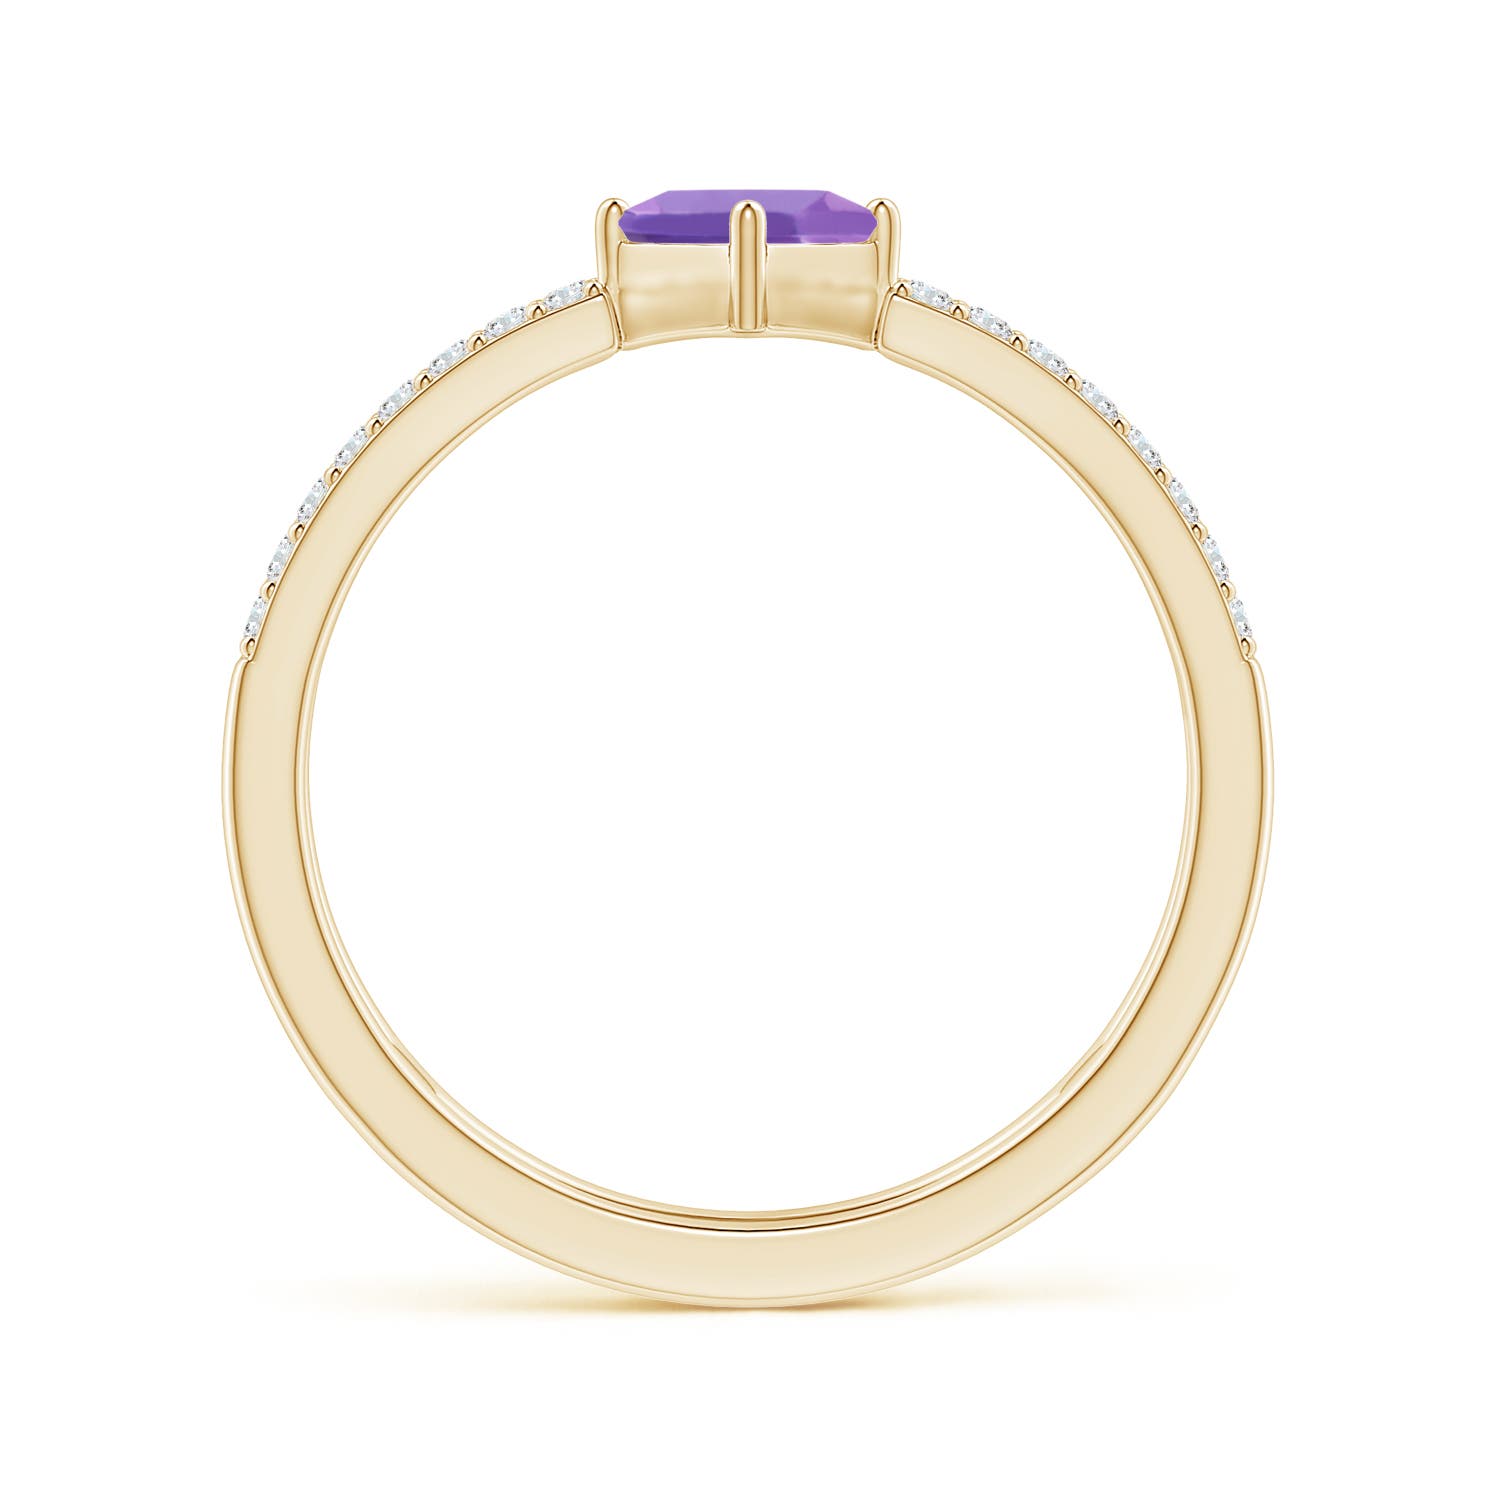 A - Amethyst / 0.58 CT / 14 KT Yellow Gold